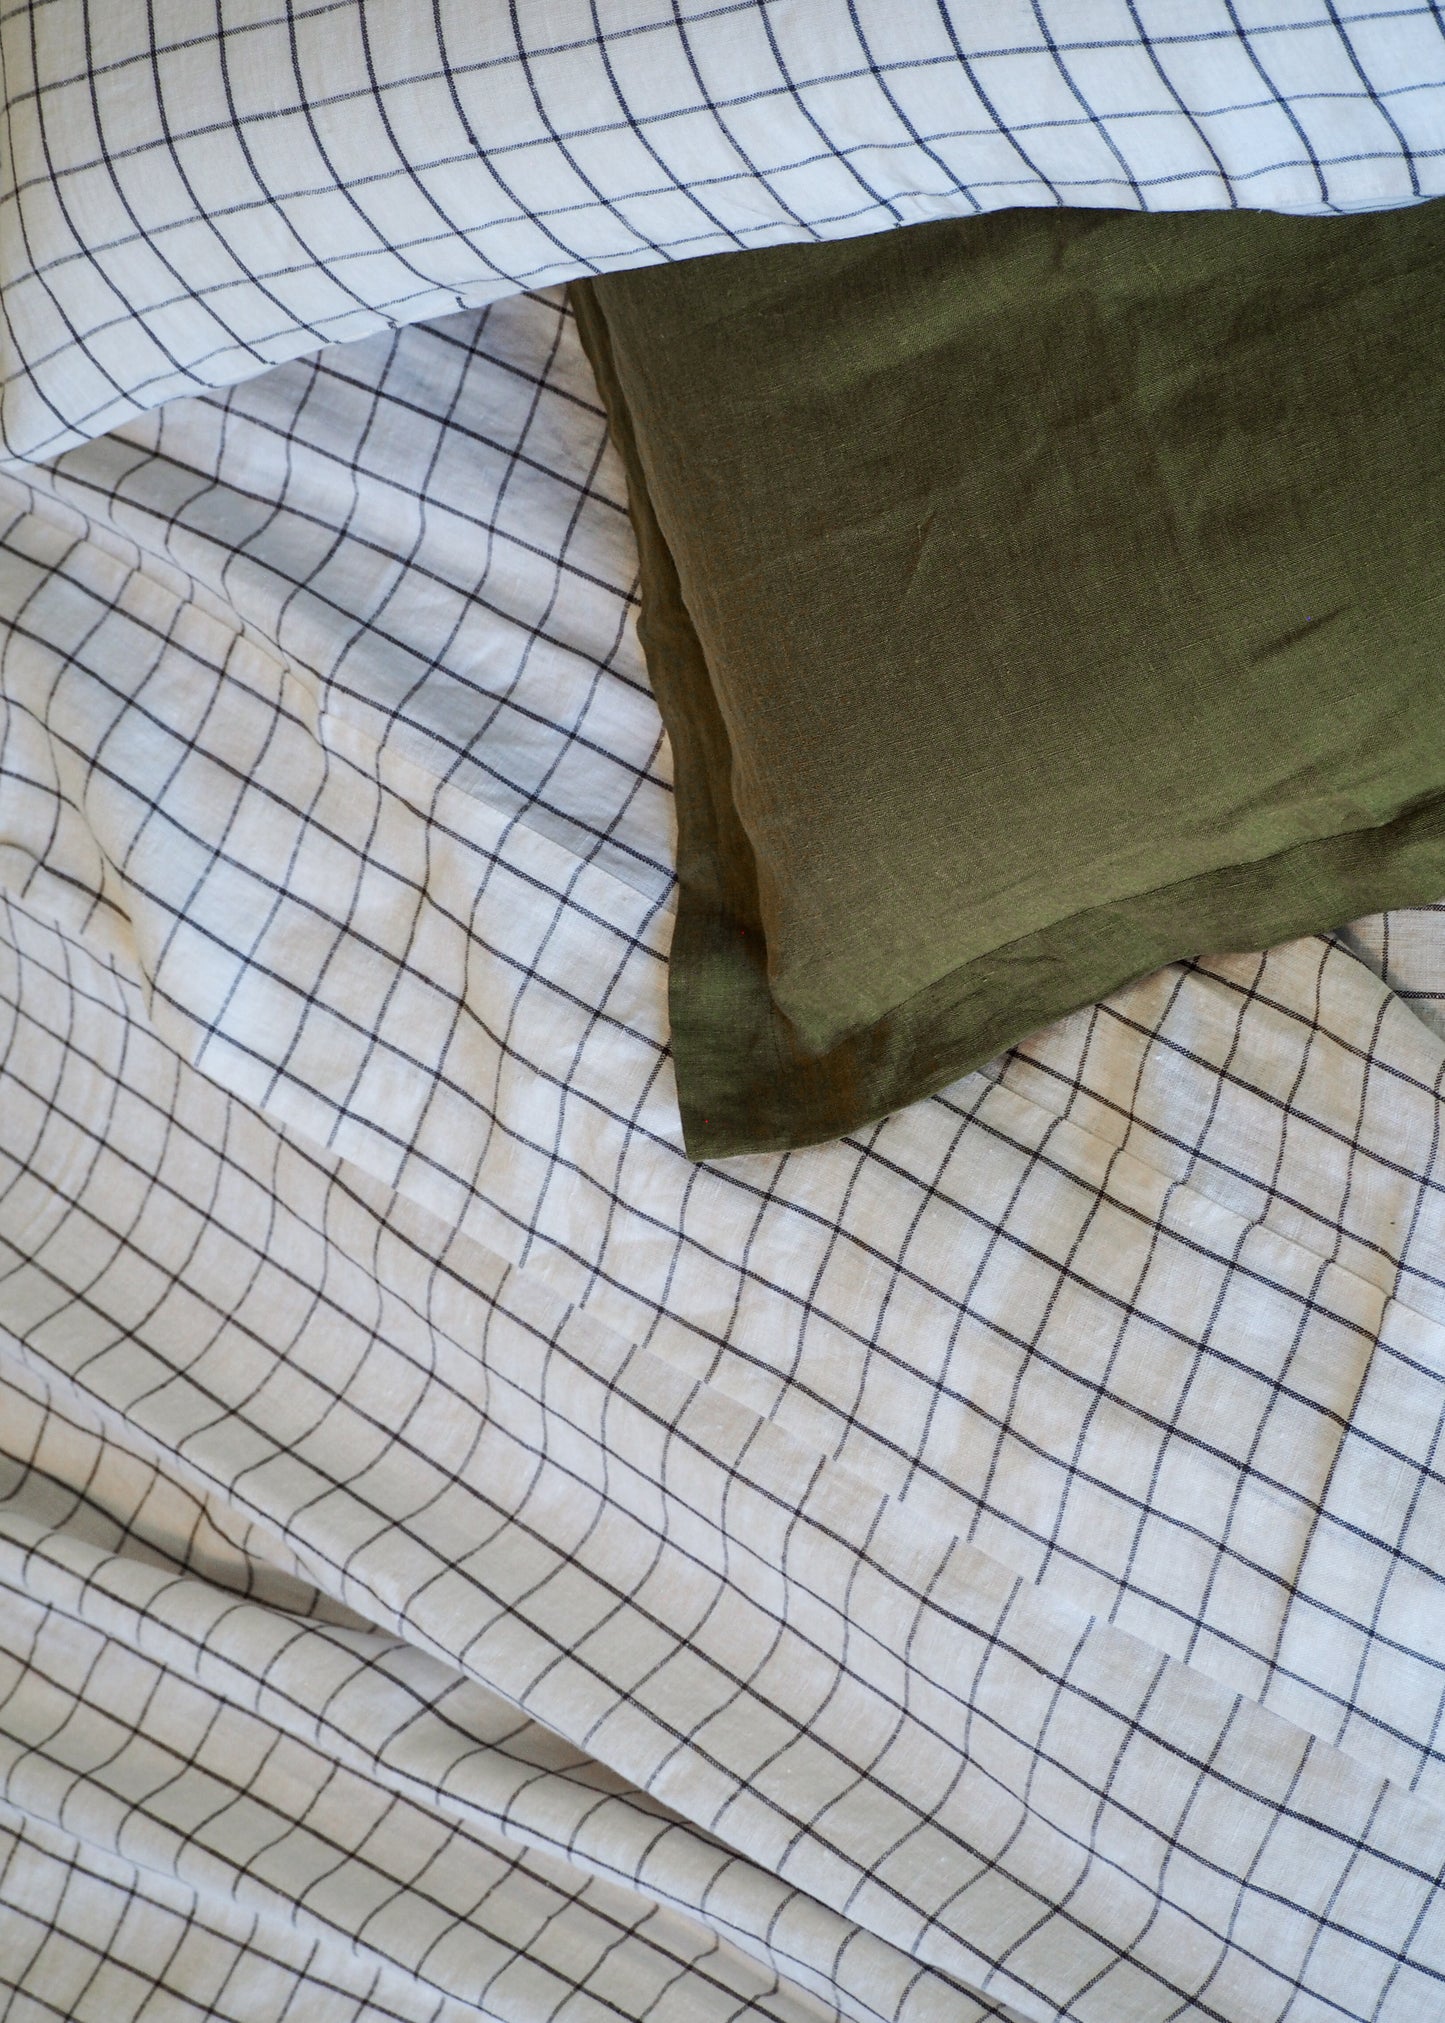 Moss Pillowcases | Made in New Zealand